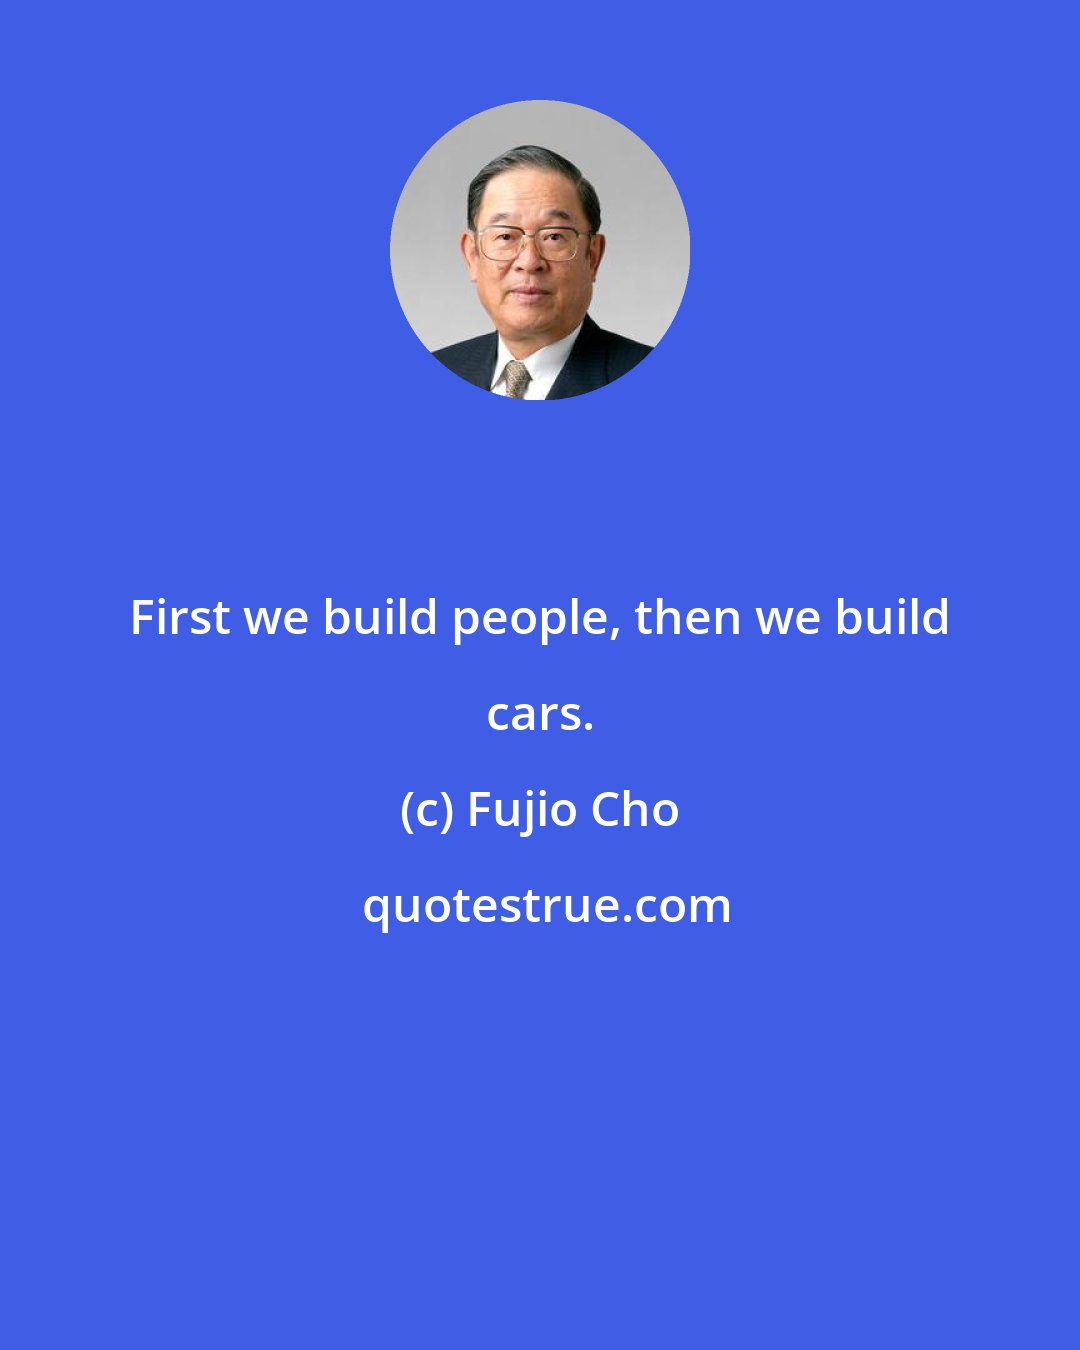 Fujio Cho: First we build people, then we build cars.